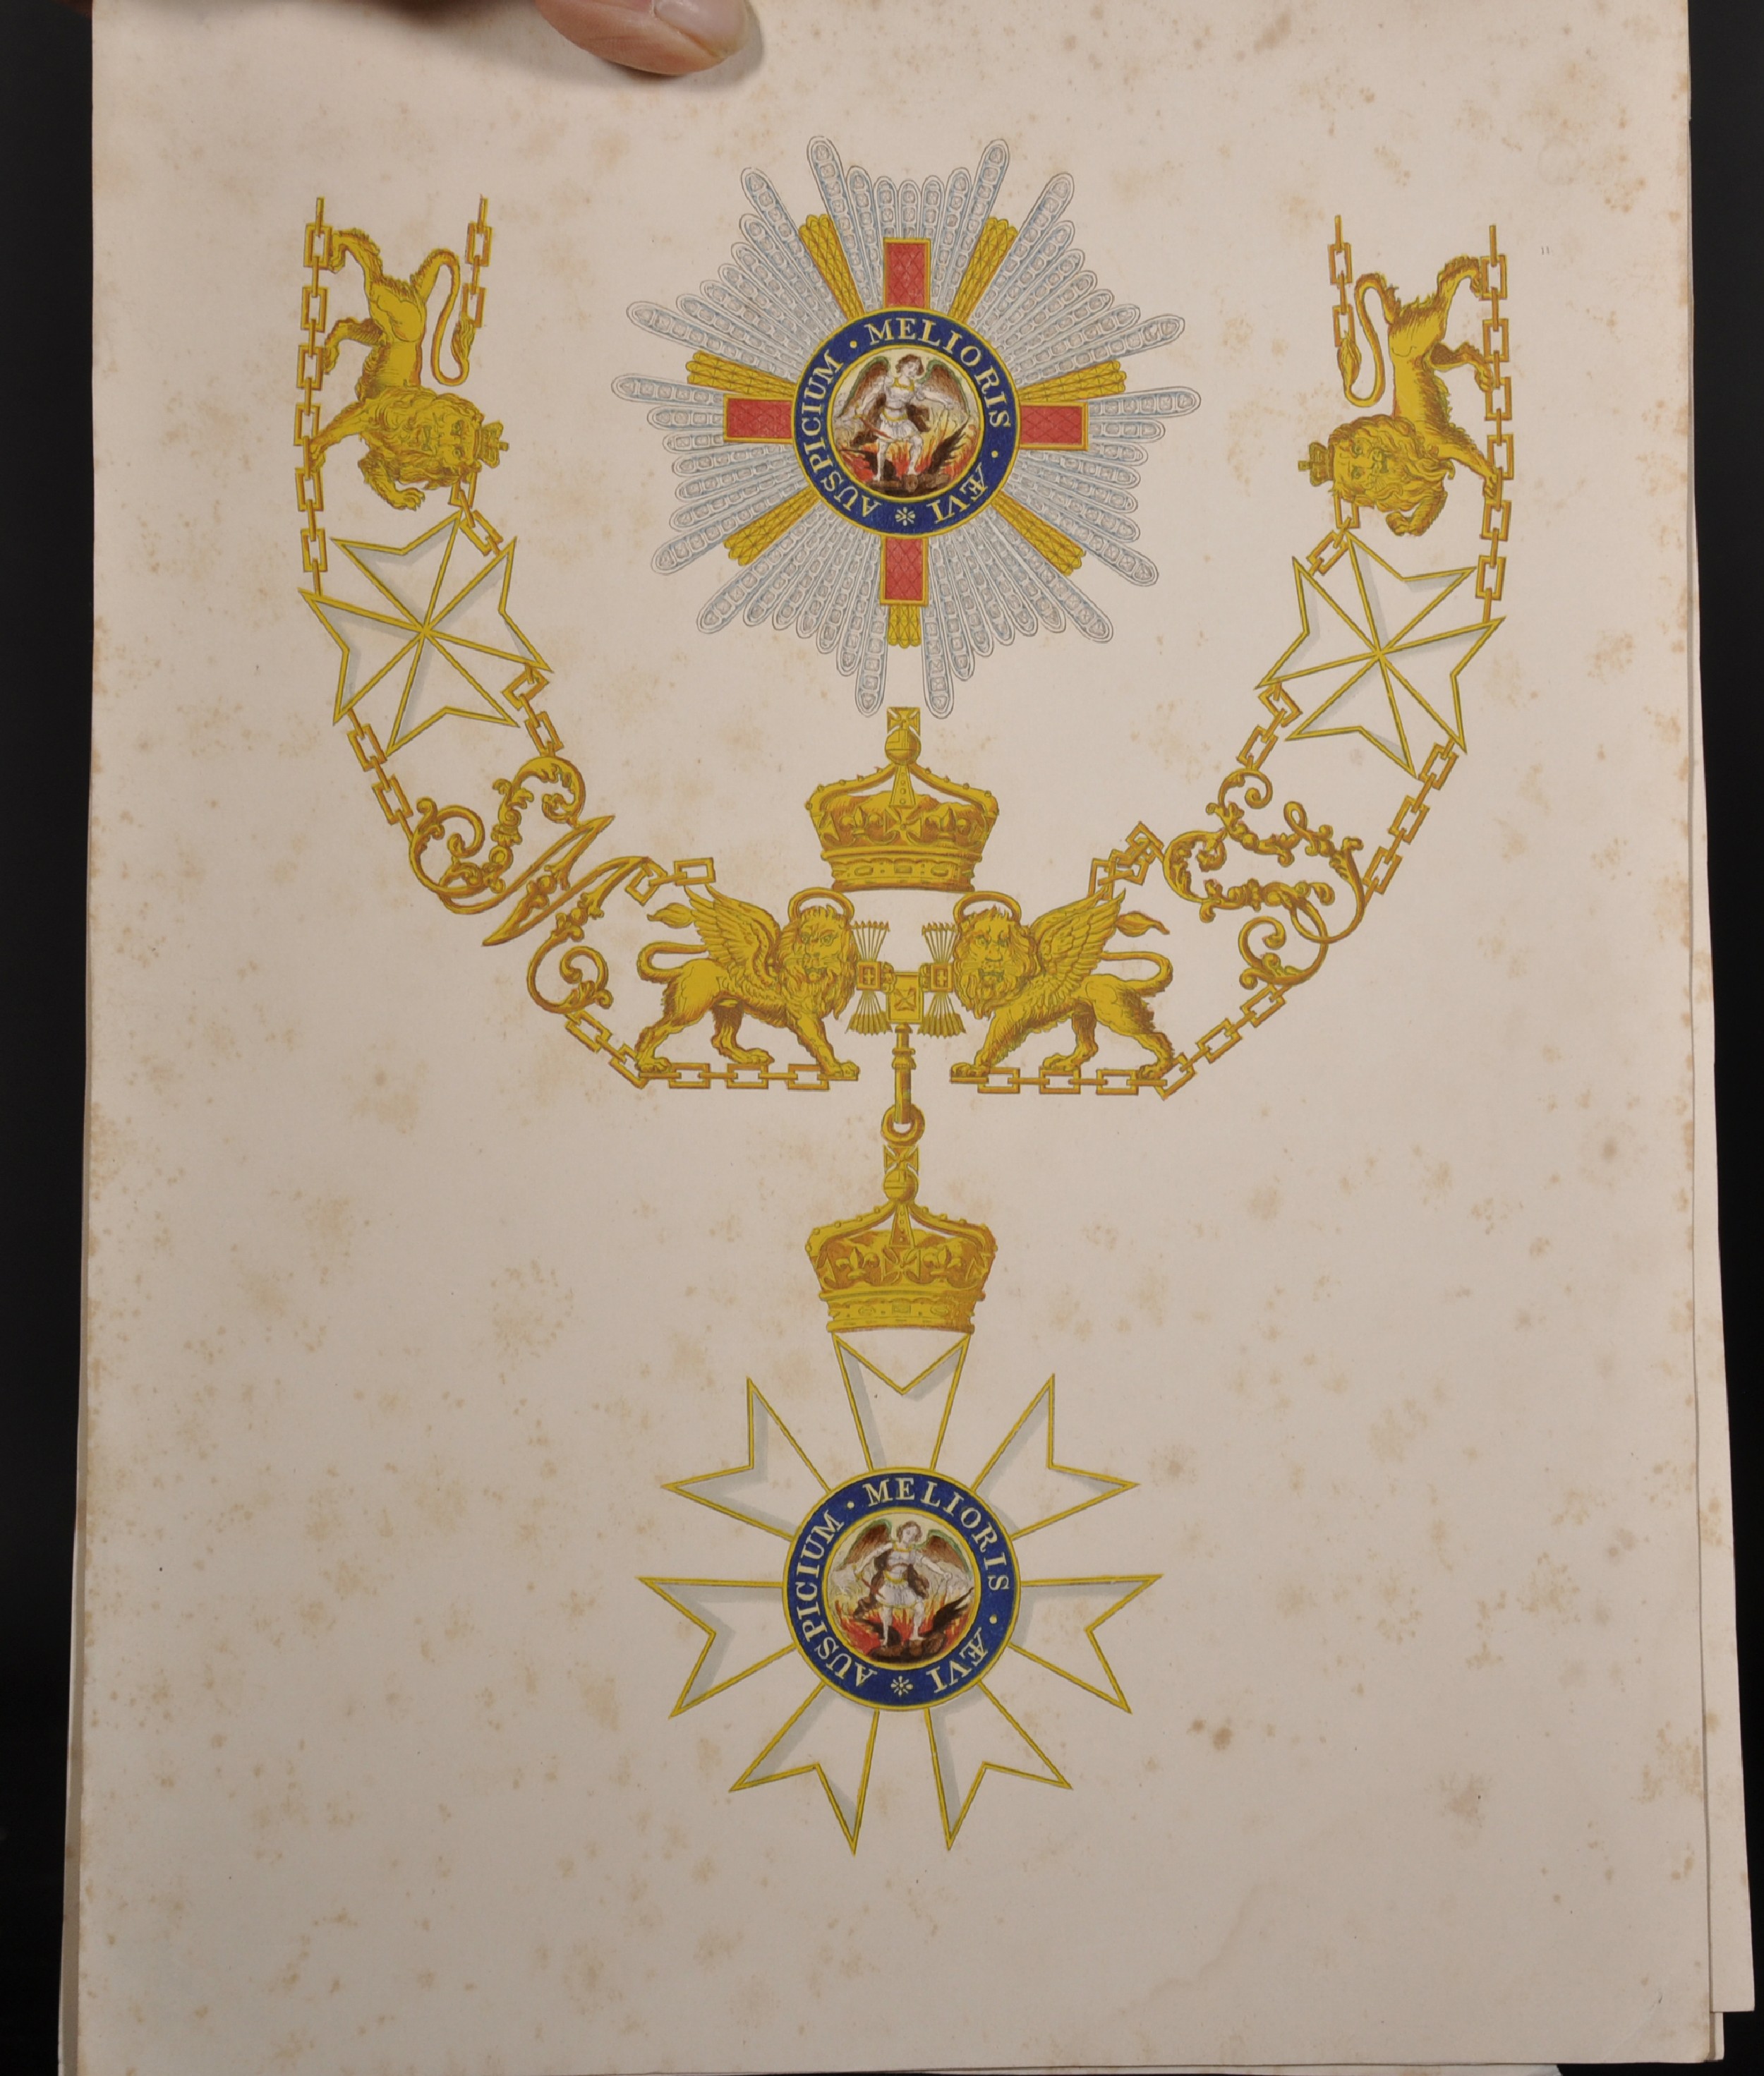 20th Century English School. "Badge & Ribboned - Order of the Thistle", Print, Inscribed on the - Image 4 of 4